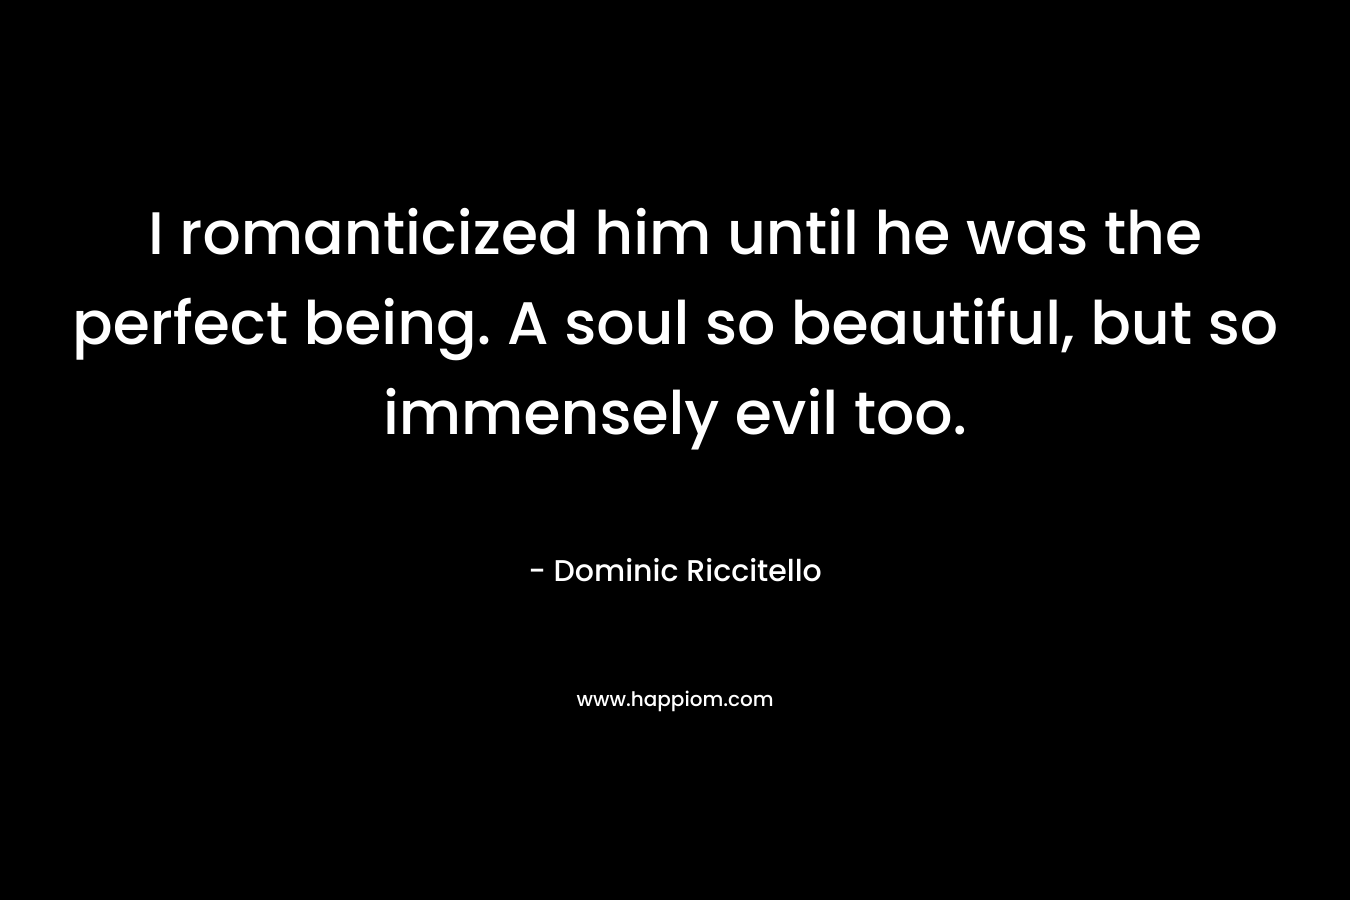 I romanticized him until he was the perfect being. A soul so beautiful, but so immensely evil too.